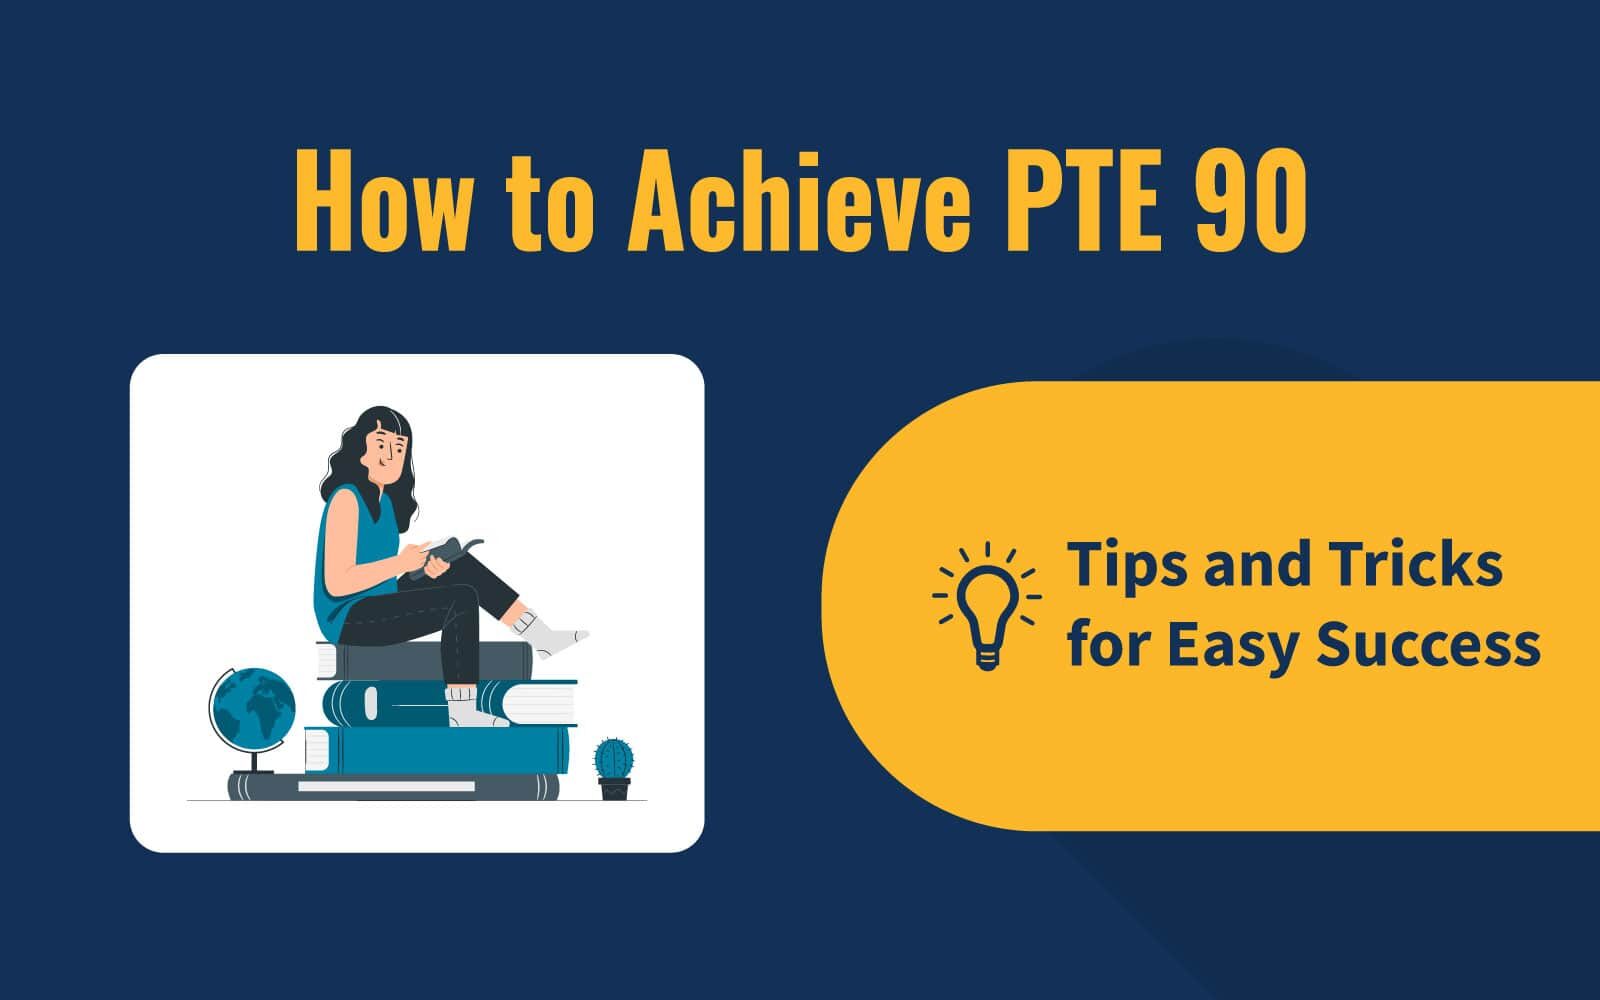 How to Achieve PTE 90